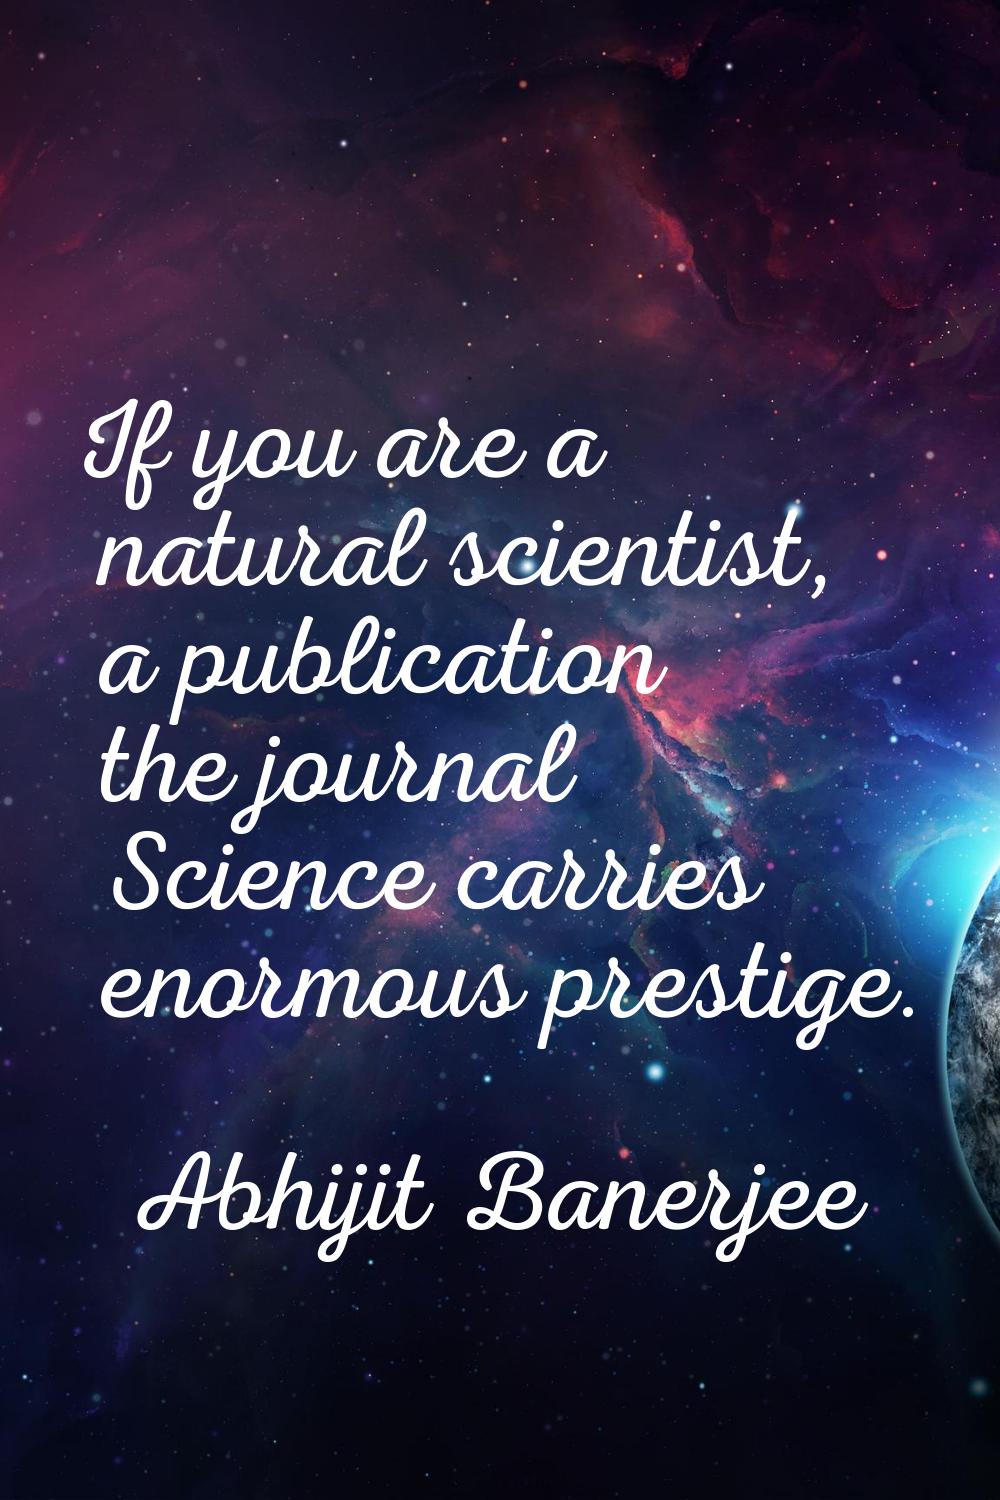 If you are a natural scientist, a publication the journal Science carries enormous prestige.